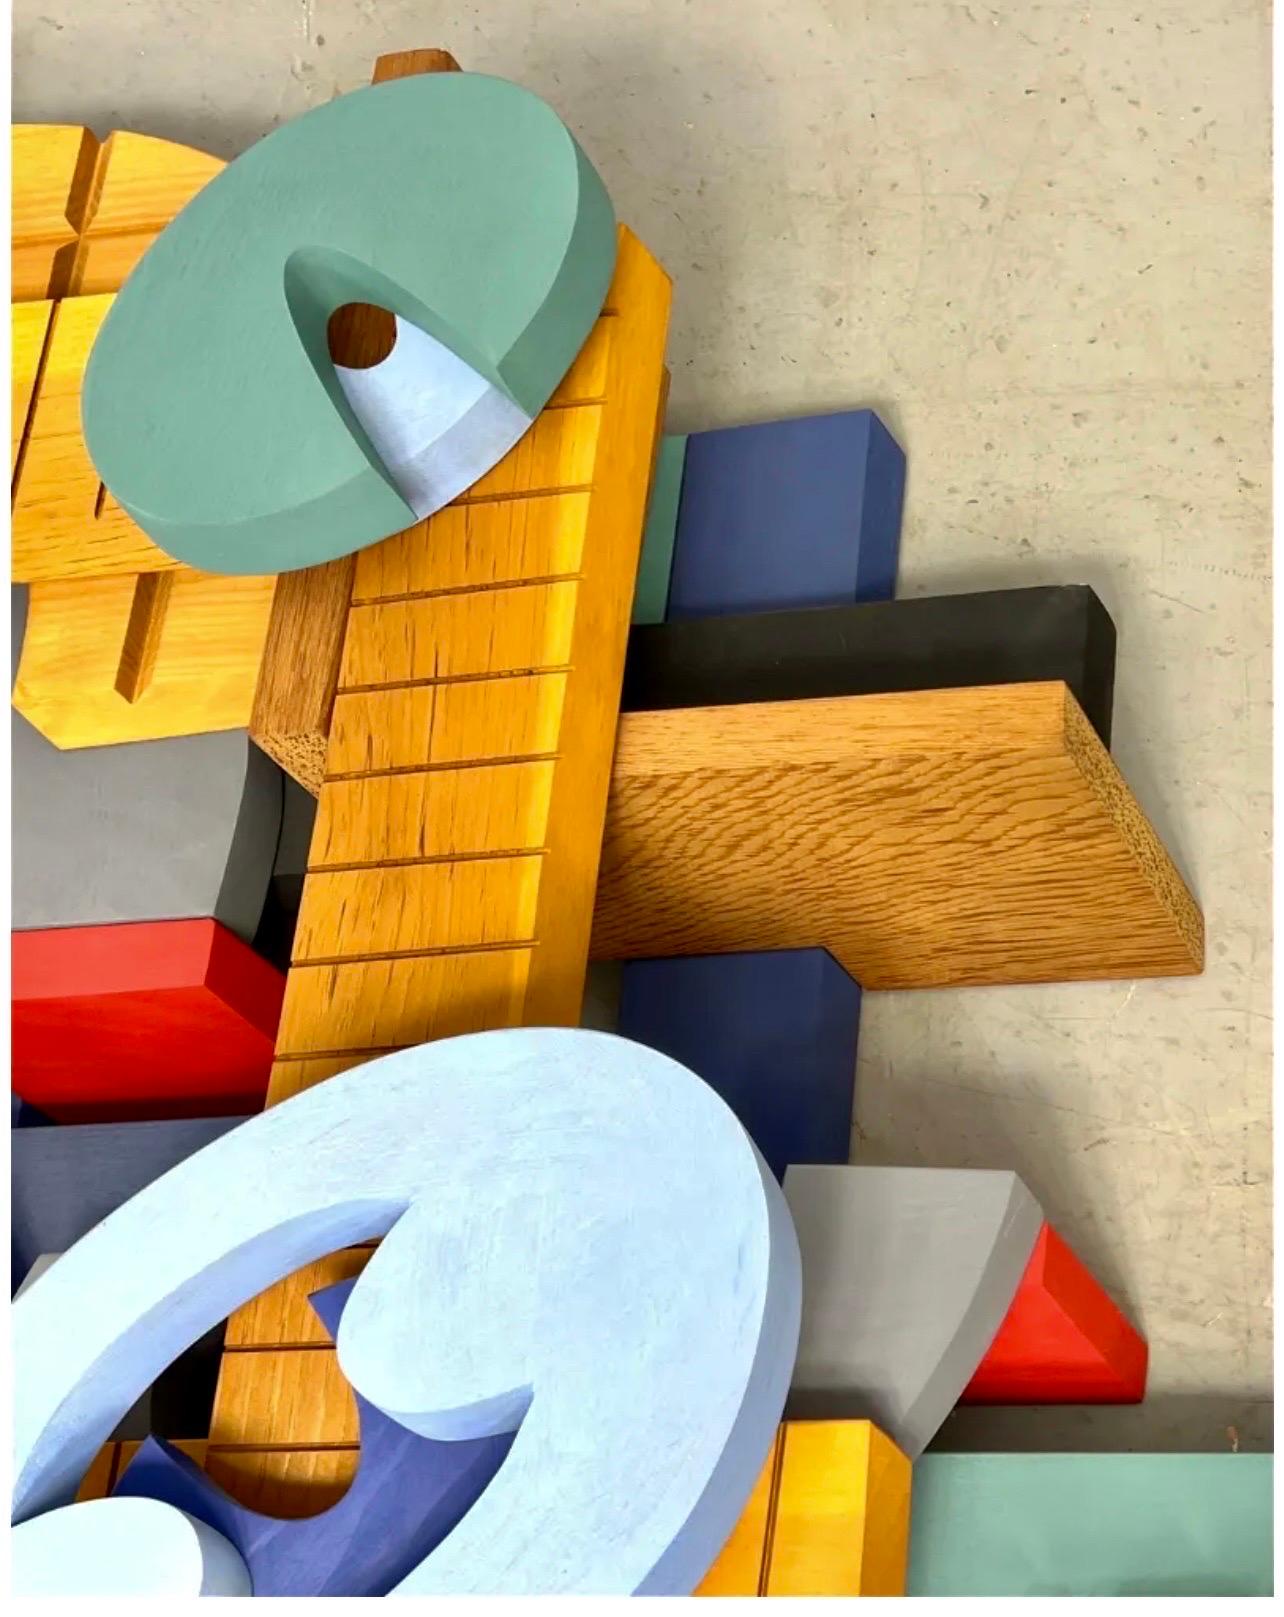 Large Abstract Wood Sculpture Colorful Wooden Painting John Okulick Wall Hanging For Sale 4